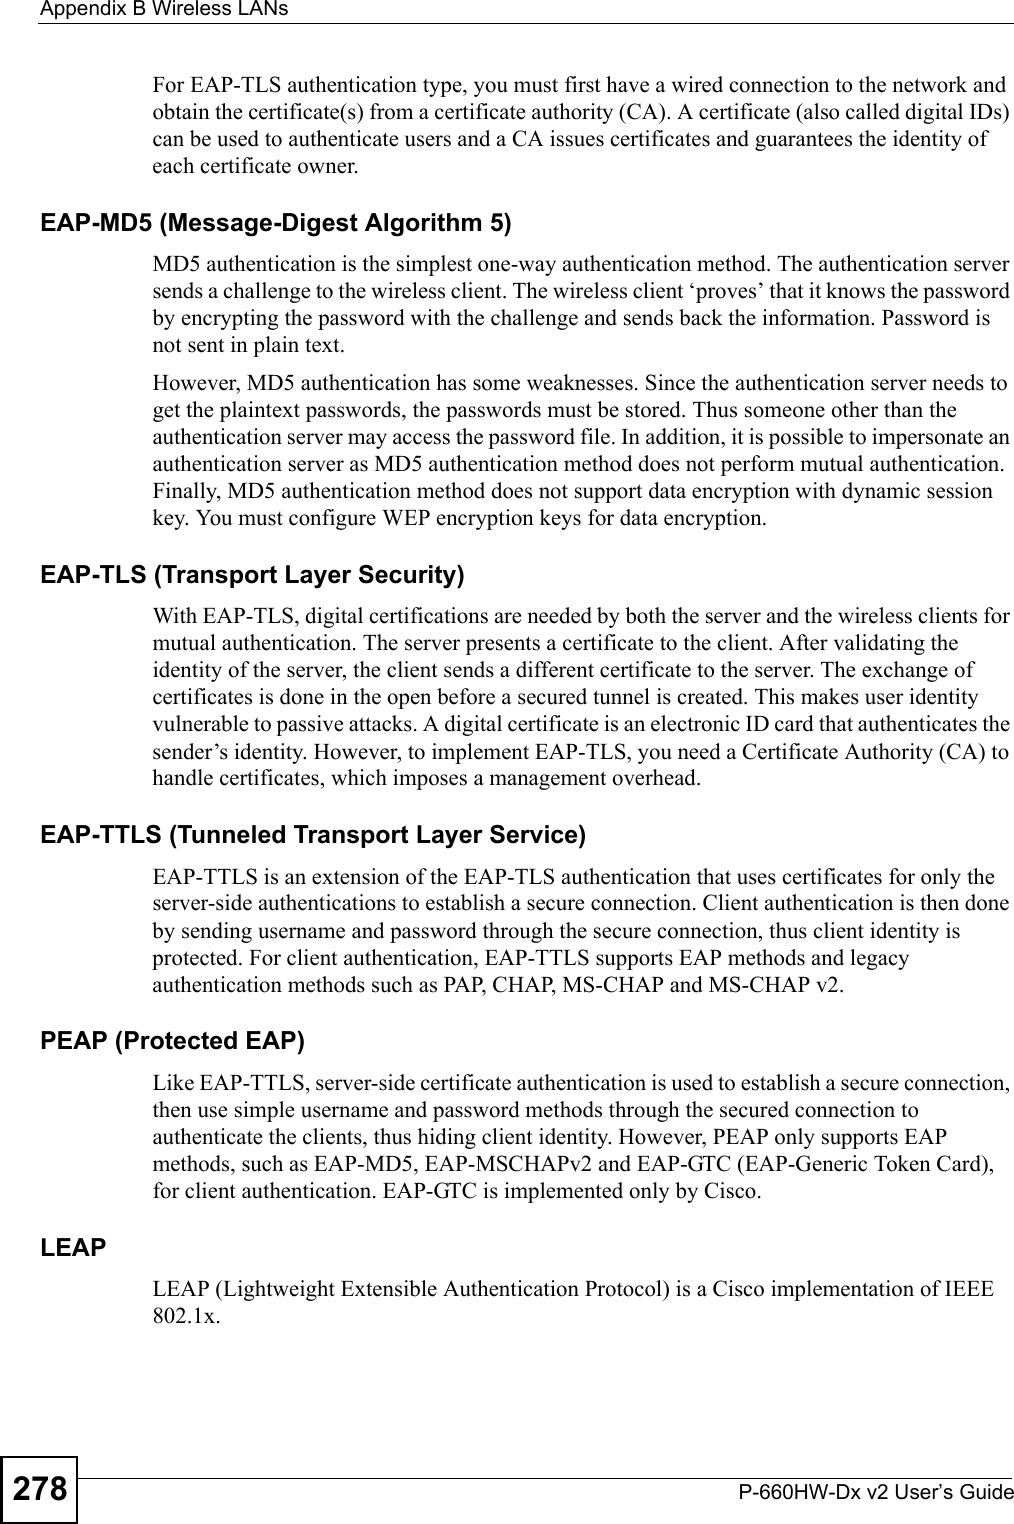 Appendix B Wireless LANsP-660HW-Dx v2 User’s Guide278For EAP-TLS authentication type, you must first have a wired connection to the network and obtain the certificate(s) from a certificate authority (CA). A certificate (also called digital IDs) can be used to authenticate users and a CA issues certificates and guarantees the identity of each certificate owner.EAP-MD5 (Message-Digest Algorithm 5)MD5 authentication is the simplest one-way authentication method. The authentication server sends a challenge to the wireless client. The wireless client ‘proves’ that it knows the password by encrypting the password with the challenge and sends back the information. Password is not sent in plain text. However, MD5 authentication has some weaknesses. Since the authentication server needs to get the plaintext passwords, the passwords must be stored. Thus someone other than the authentication server may access the password file. In addition, it is possible to impersonate an authentication server as MD5 authentication method does not perform mutual authentication. Finally, MD5 authentication method does not support data encryption with dynamic session key. You must configure WEP encryption keys for data encryption. EAP-TLS (Transport Layer Security)With EAP-TLS, digital certifications are needed by both the server and the wireless clients for mutual authentication. The server presents a certificate to the client. After validating the identity of the server, the client sends a different certificate to the server. The exchange of certificates is done in the open before a secured tunnel is created. This makes user identity vulnerable to passive attacks. A digital certificate is an electronic ID card that authenticates the sender’s identity. However, to implement EAP-TLS, you need a Certificate Authority (CA) to handle certificates, which imposes a management overhead. EAP-TTLS (Tunneled Transport Layer Service) EAP-TTLS is an extension of the EAP-TLS authentication that uses certificates for only the server-side authentications to establish a secure connection. Client authentication is then done by sending username and password through the secure connection, thus client identity is protected. For client authentication, EAP-TTLS supports EAP methods and legacy authentication methods such as PAP, CHAP, MS-CHAP and MS-CHAP v2. PEAP (Protected EAP)   Like EAP-TTLS, server-side certificate authentication is used to establish a secure connection, then use simple username and password methods through the secured connection to authenticate the clients, thus hiding client identity. However, PEAP only supports EAP methods, such as EAP-MD5, EAP-MSCHAPv2 and EAP-GTC (EAP-Generic Token Card), for client authentication. EAP-GTC is implemented only by Cisco.LEAPLEAP (Lightweight Extensible Authentication Protocol) is a Cisco implementation of IEEE 802.1x. 